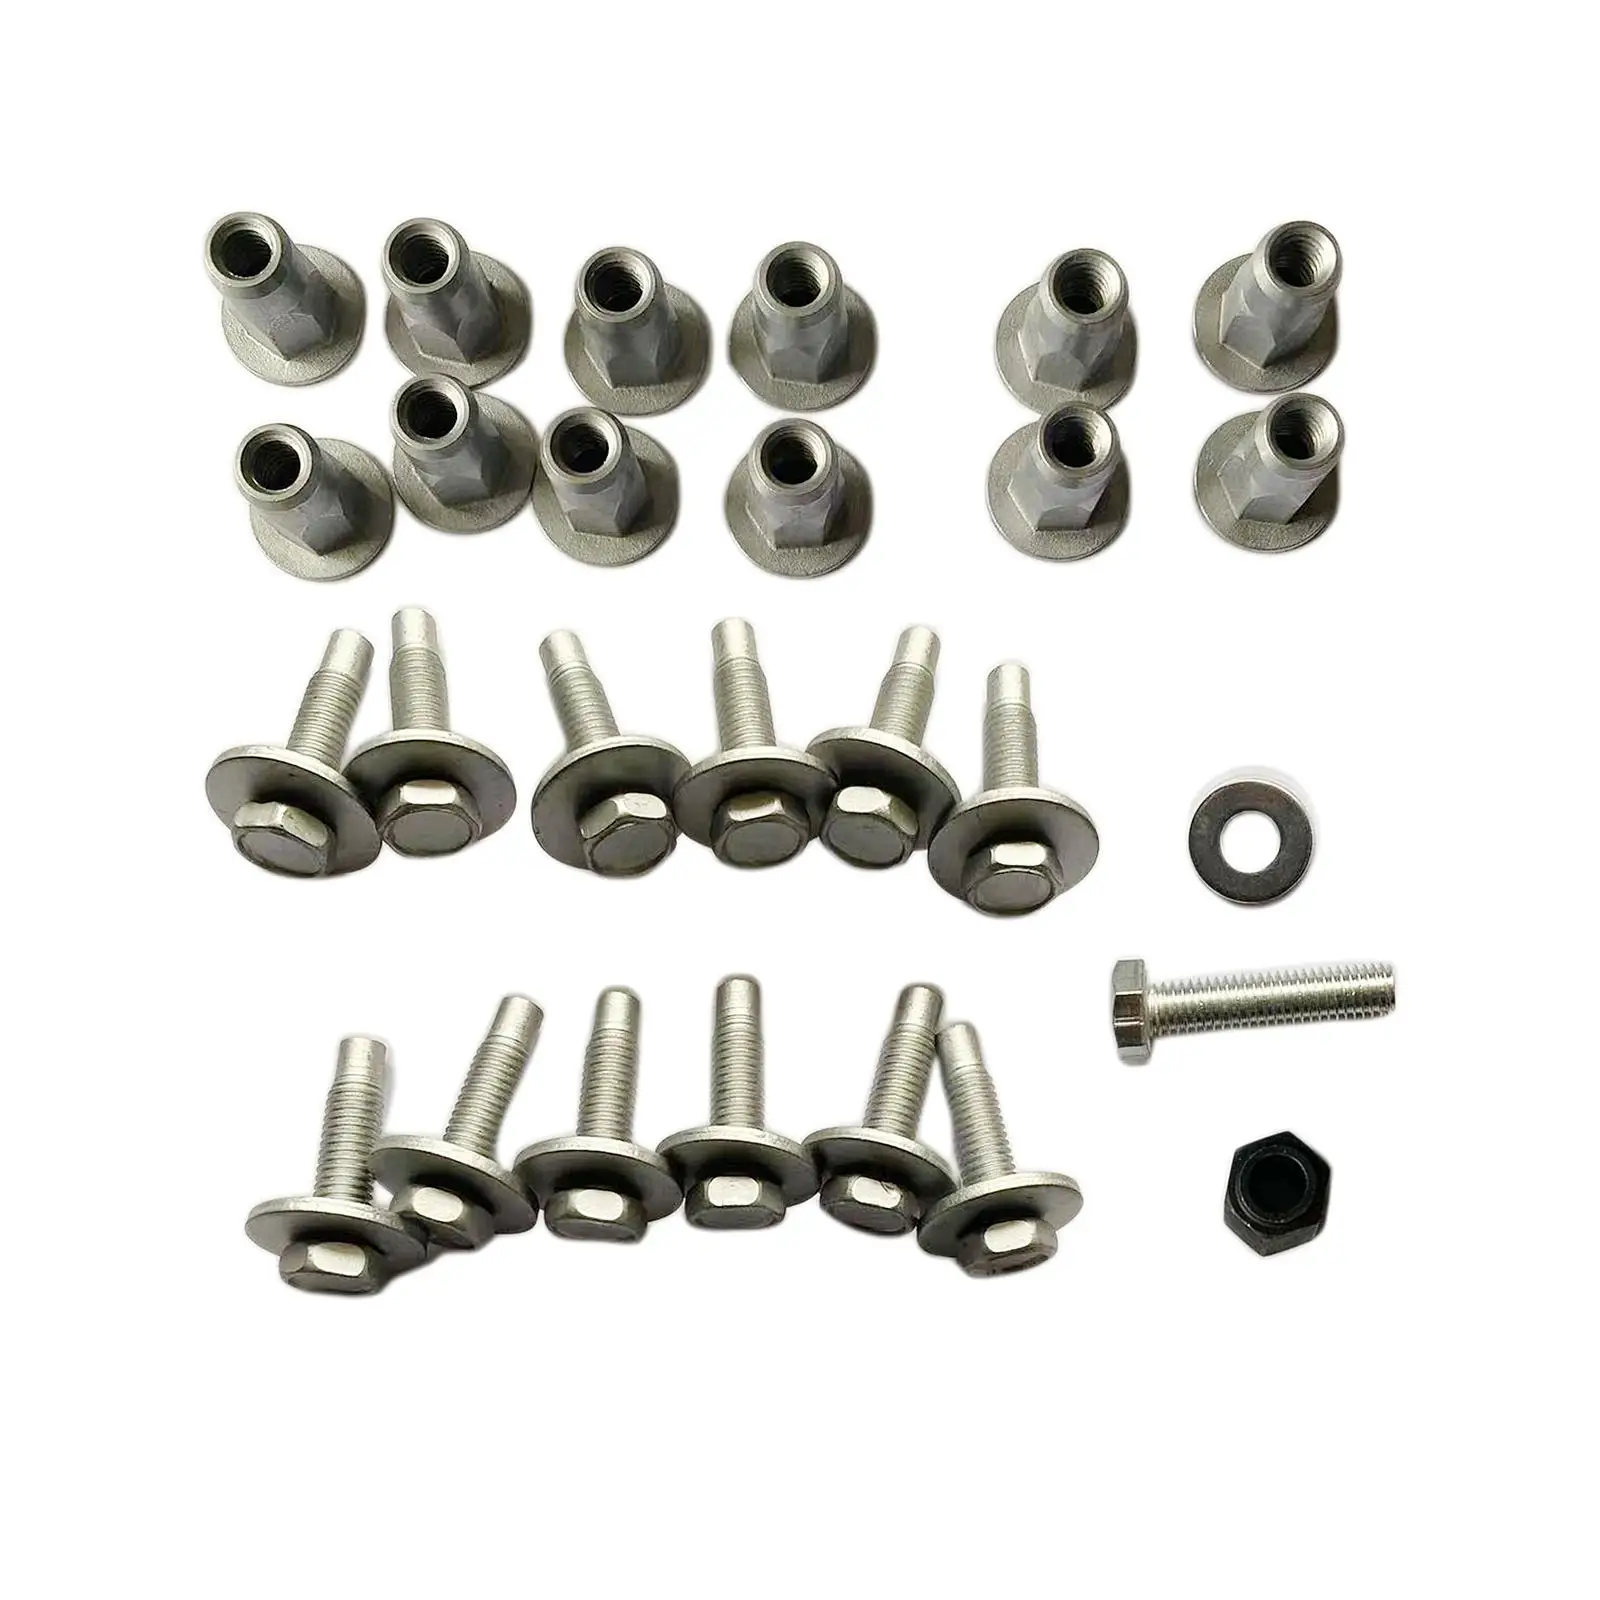 27Pcs Car Sidestep Mounting Kit High Performance Nuts Bolts Set Auto for Dodge RAM 1500 2500 3500 Repair Accessories